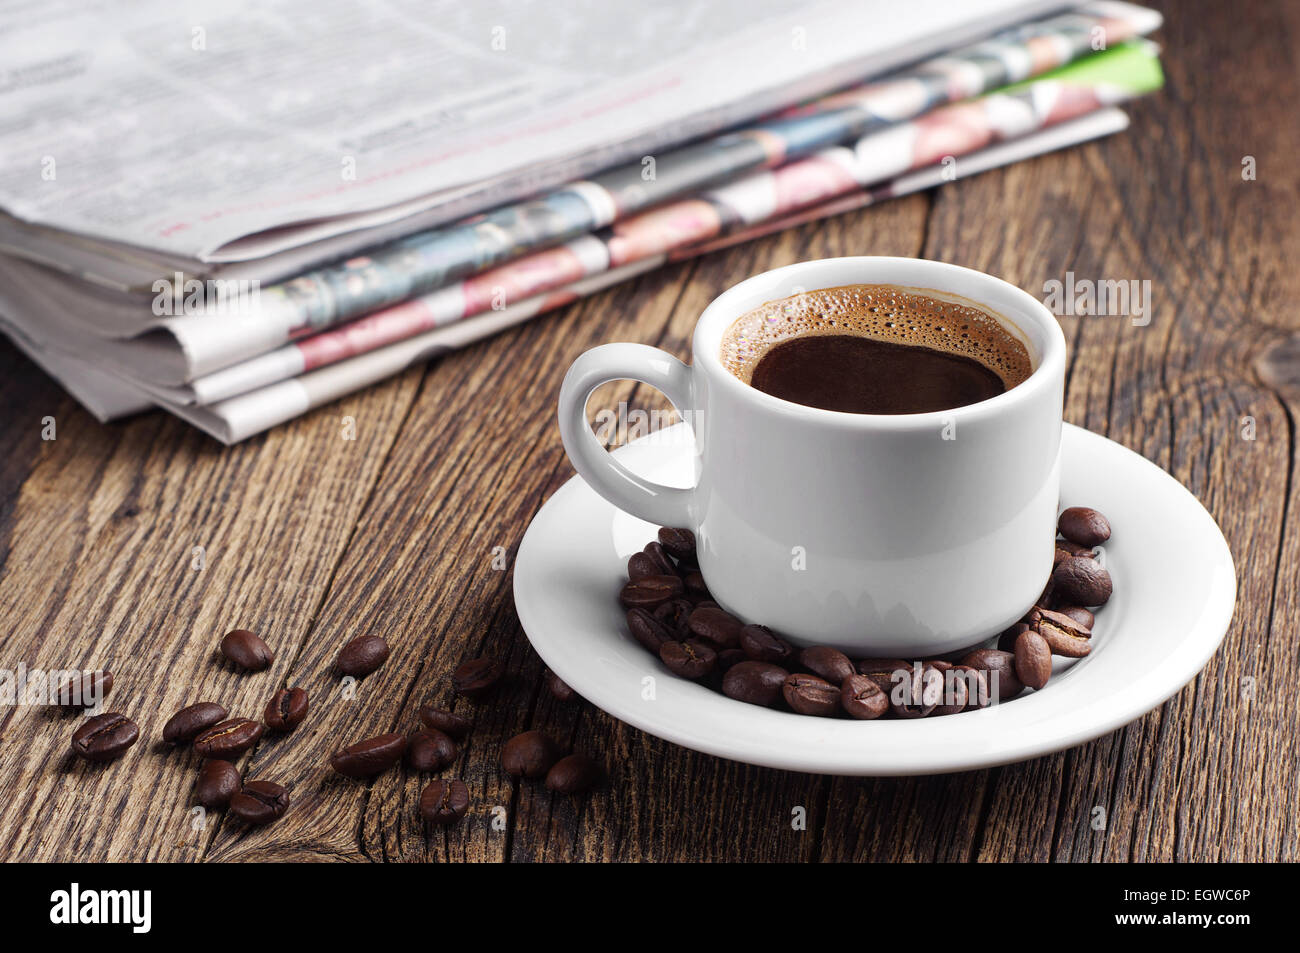 Cup of coffee and newspaper on old wooden table Stock Photo